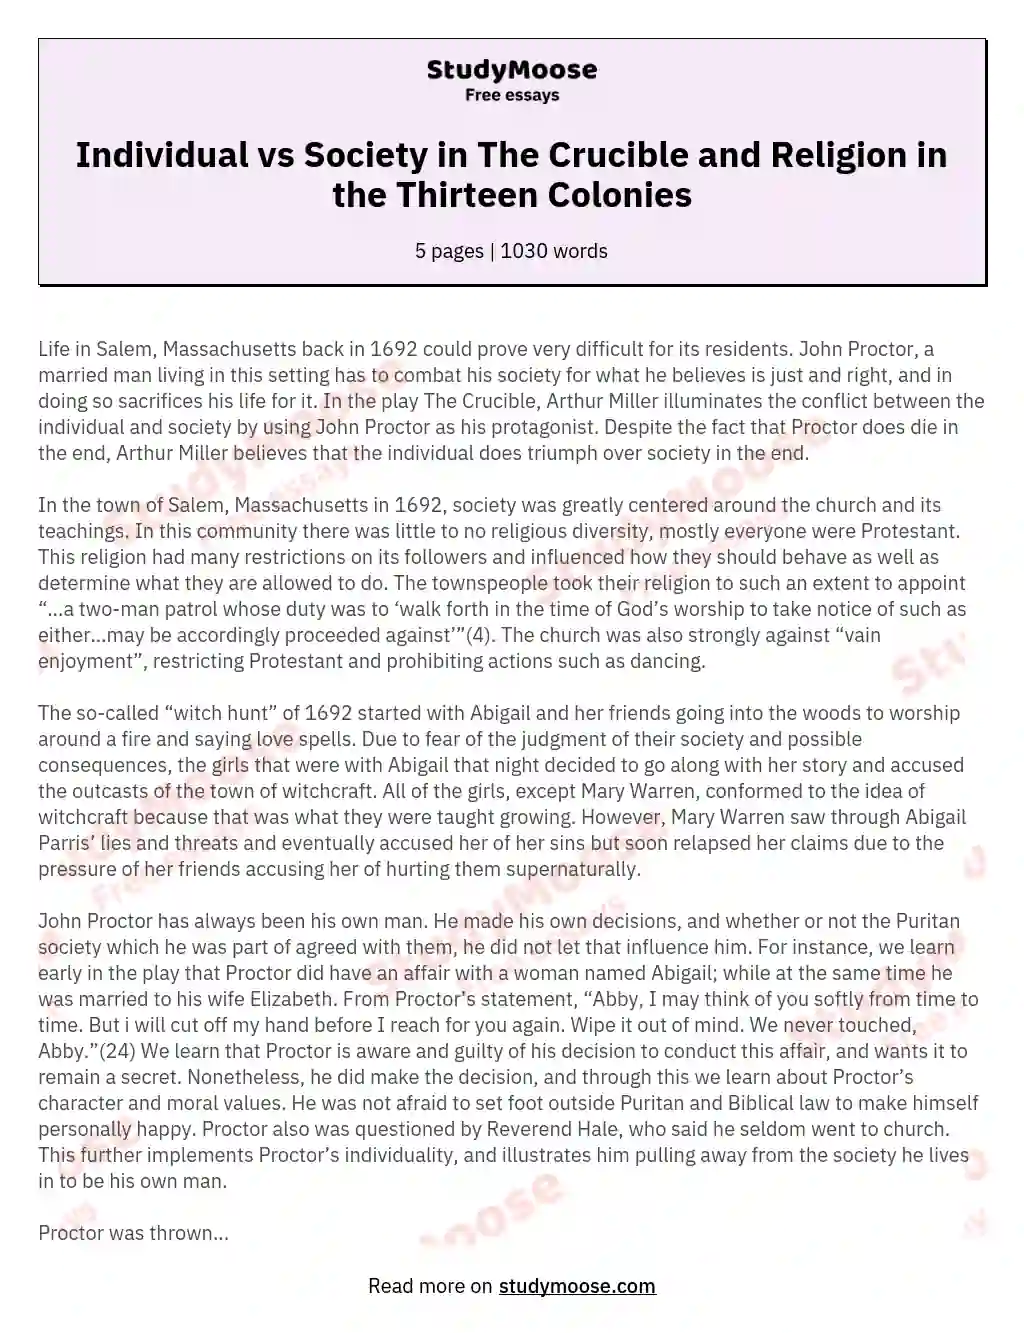 Individual vs Society in The Crucible and Religion in the Thirteen Colonies essay